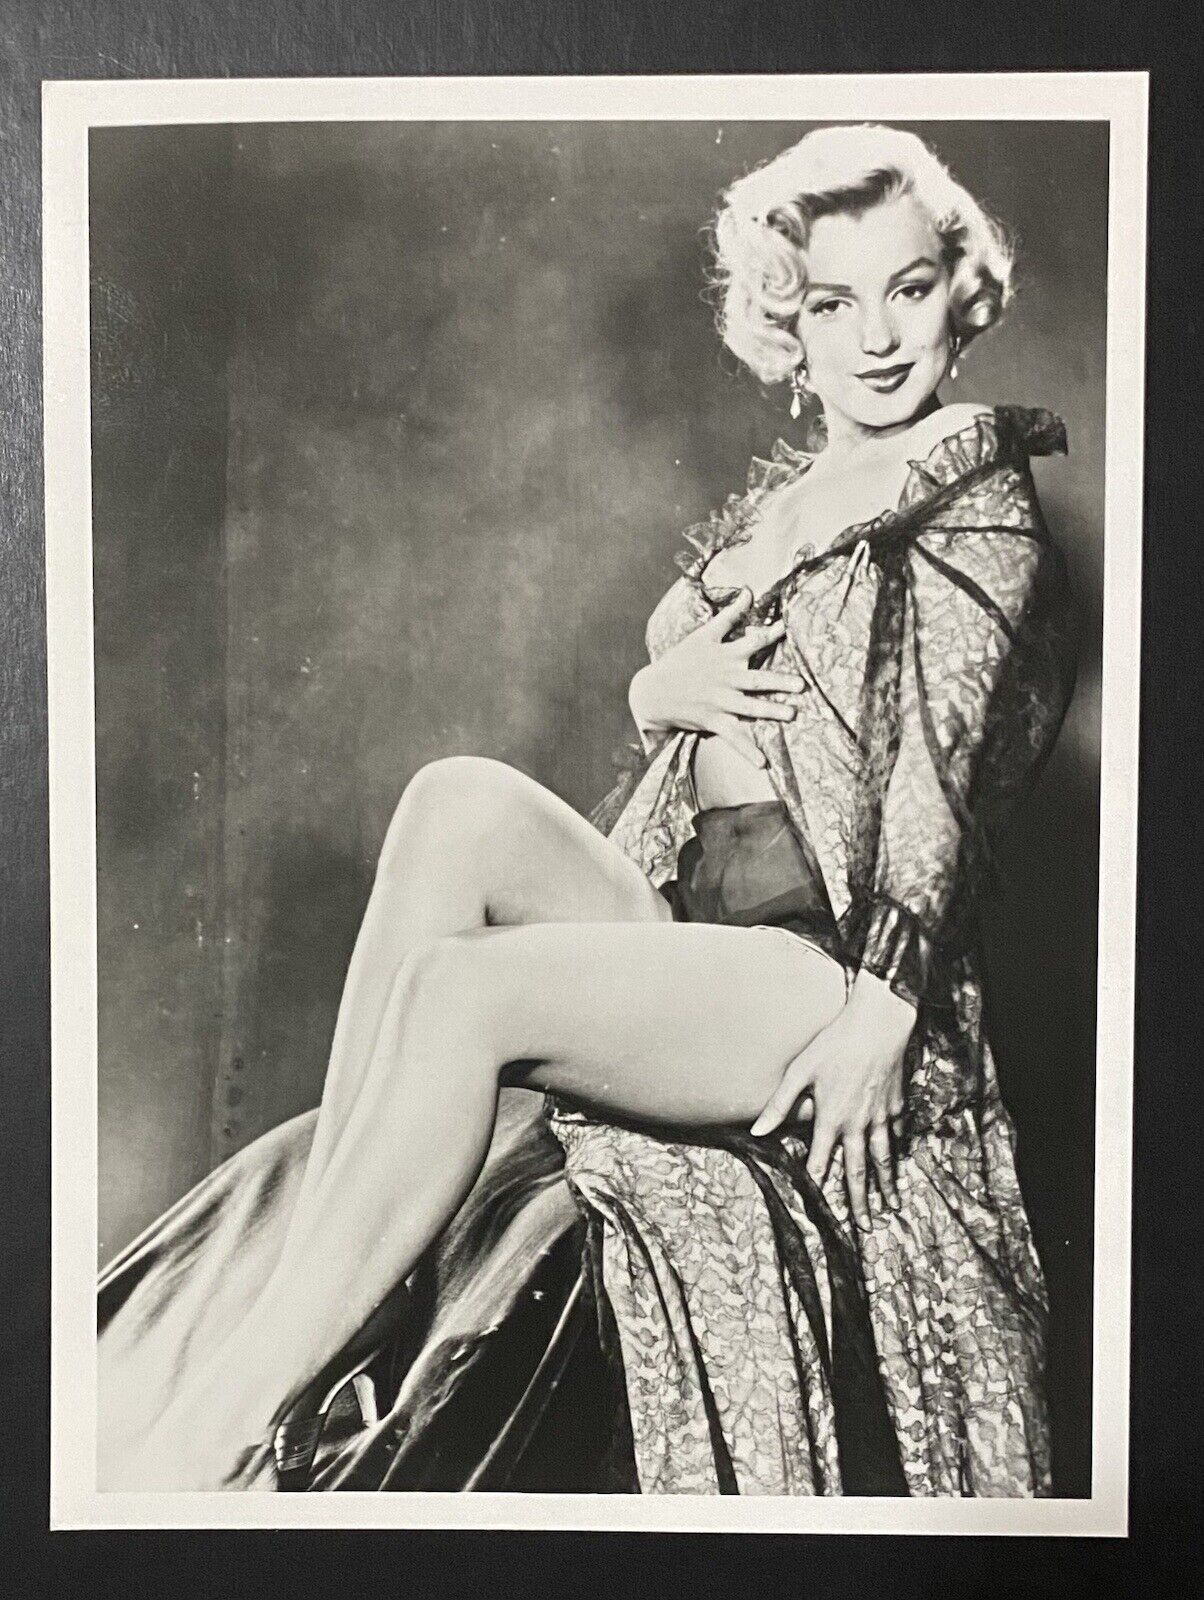 1952 1953 Marilyn Monroe Original Photograph Frank Powolny Glamour Pinup Stamped